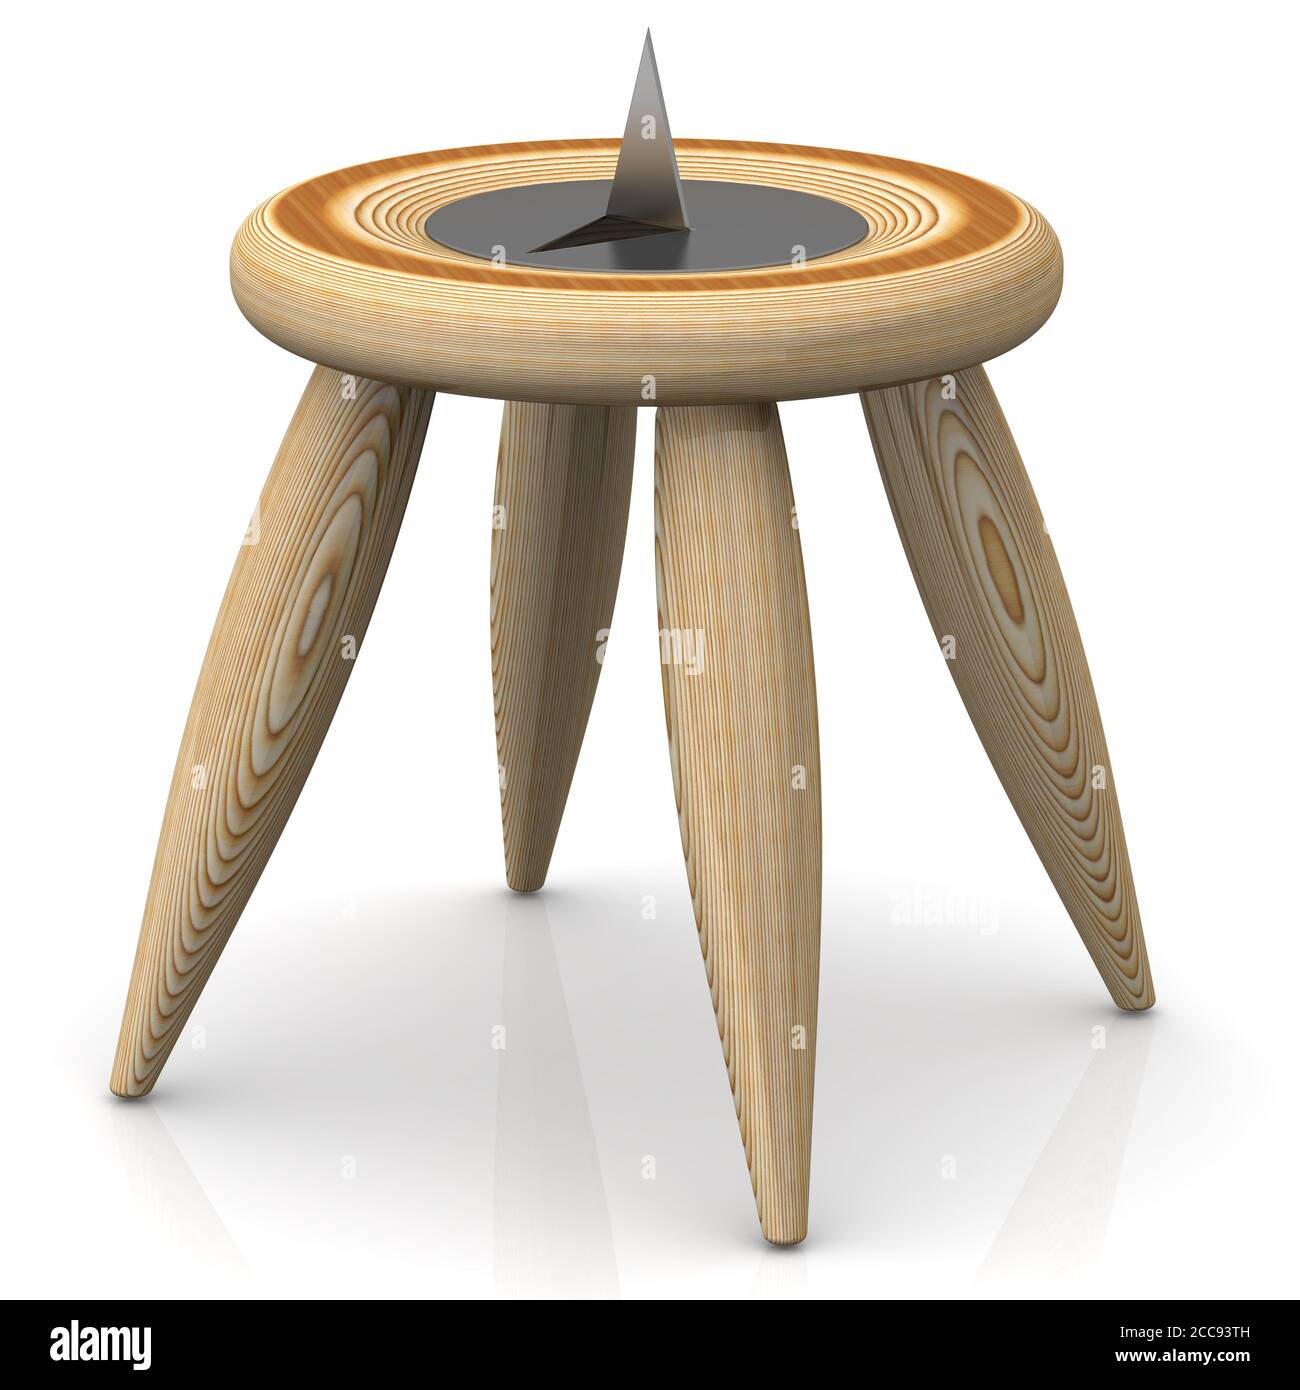 Thumbtack lying on a stool. A large and sharp thumbtack lying on a wooden stool. 3D illustration Stock Photo